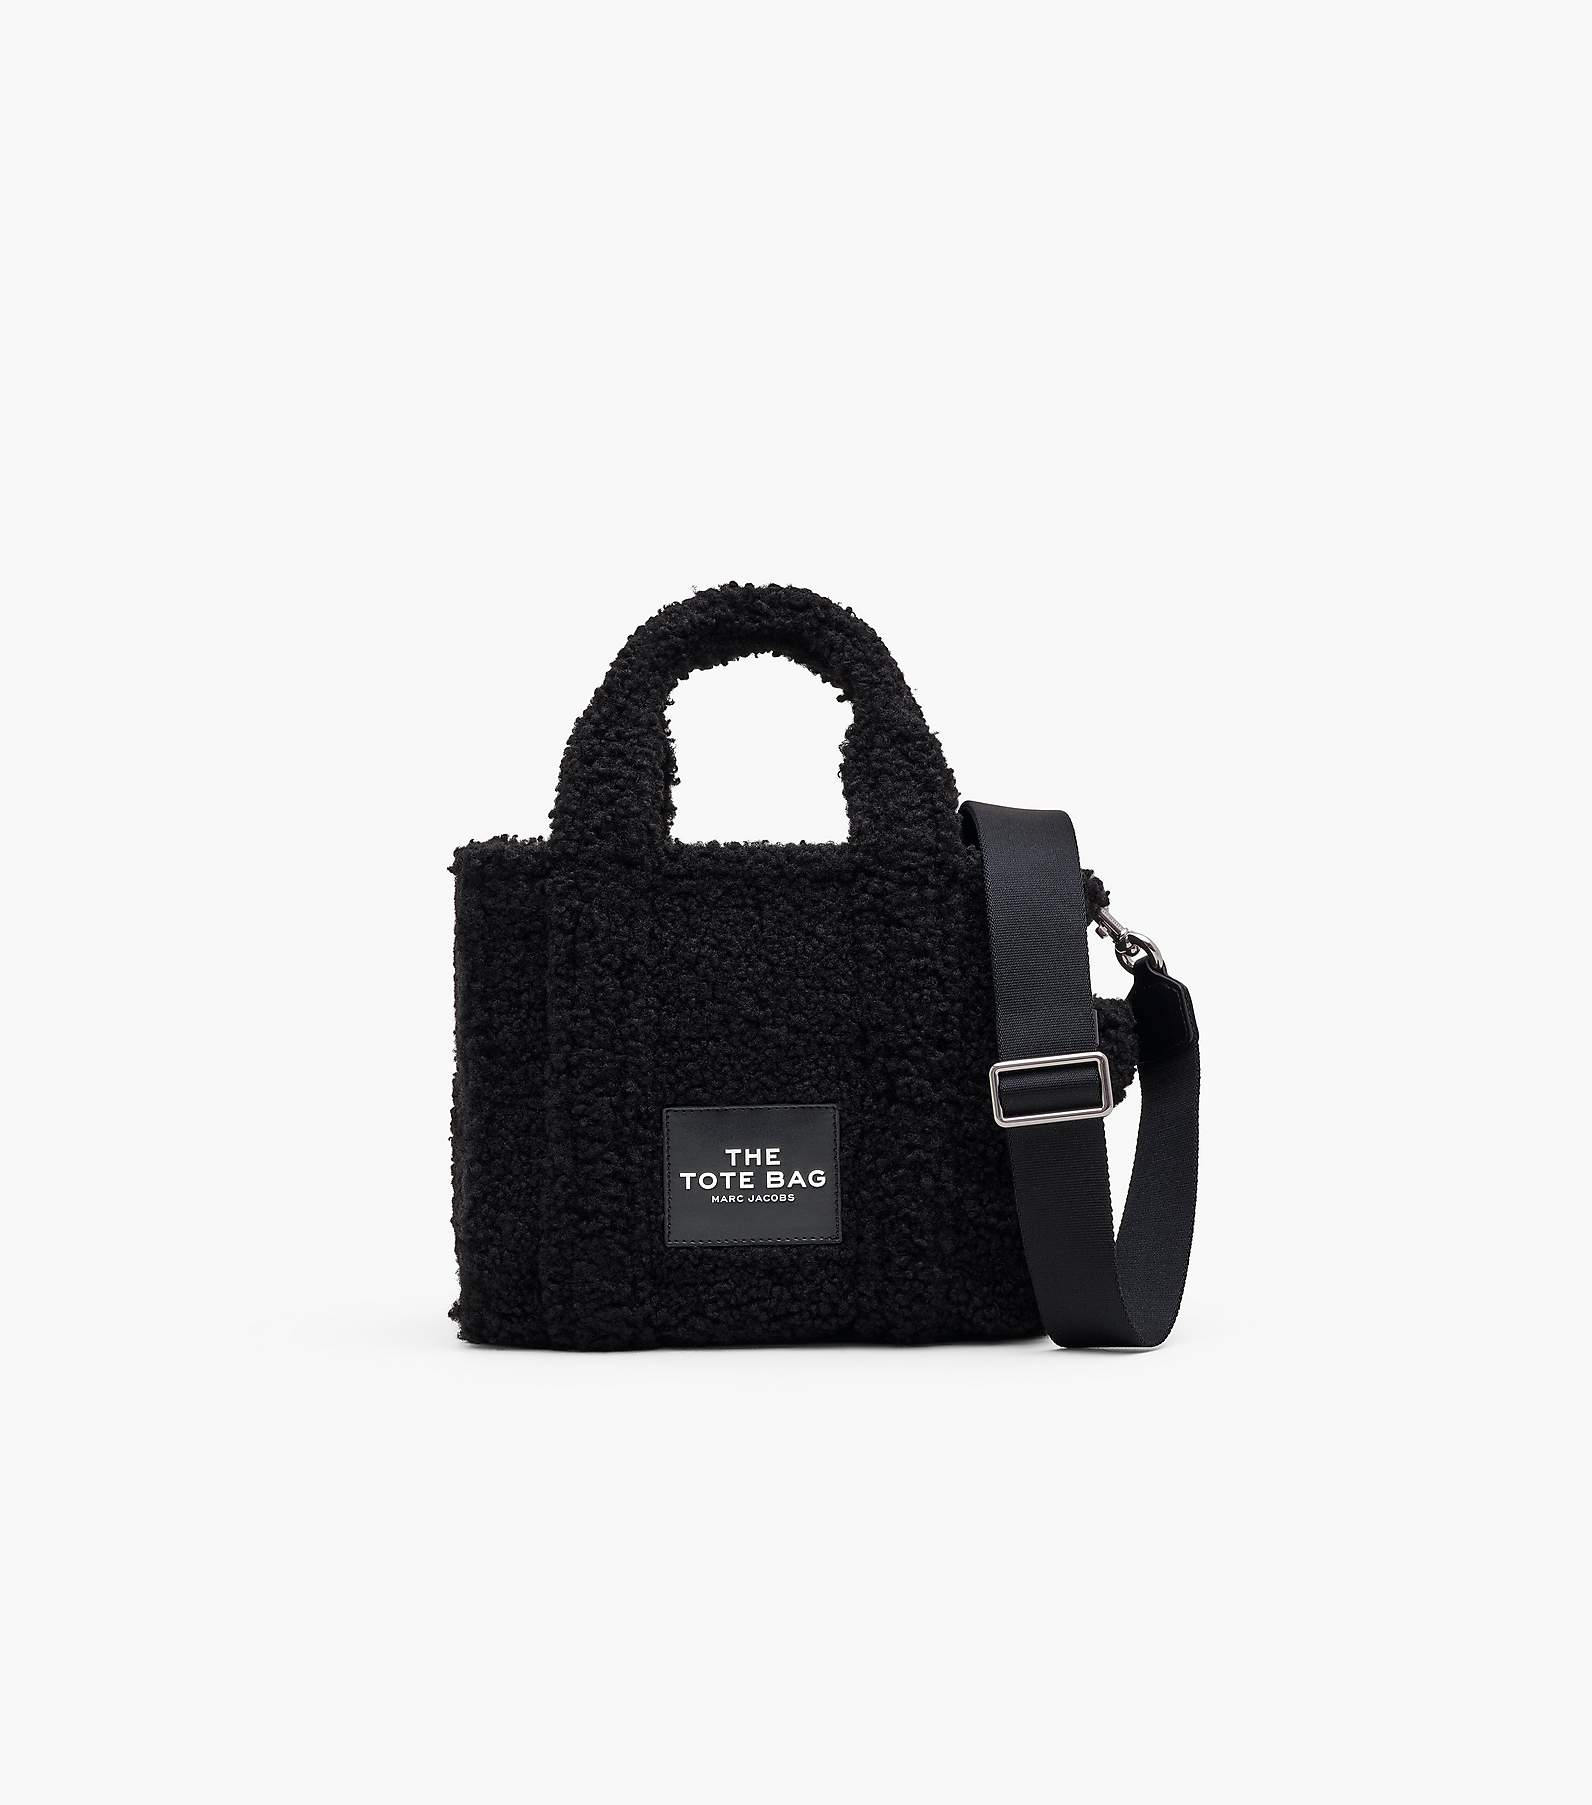 The Teddy Small Tote Bag, Marc Jacobs